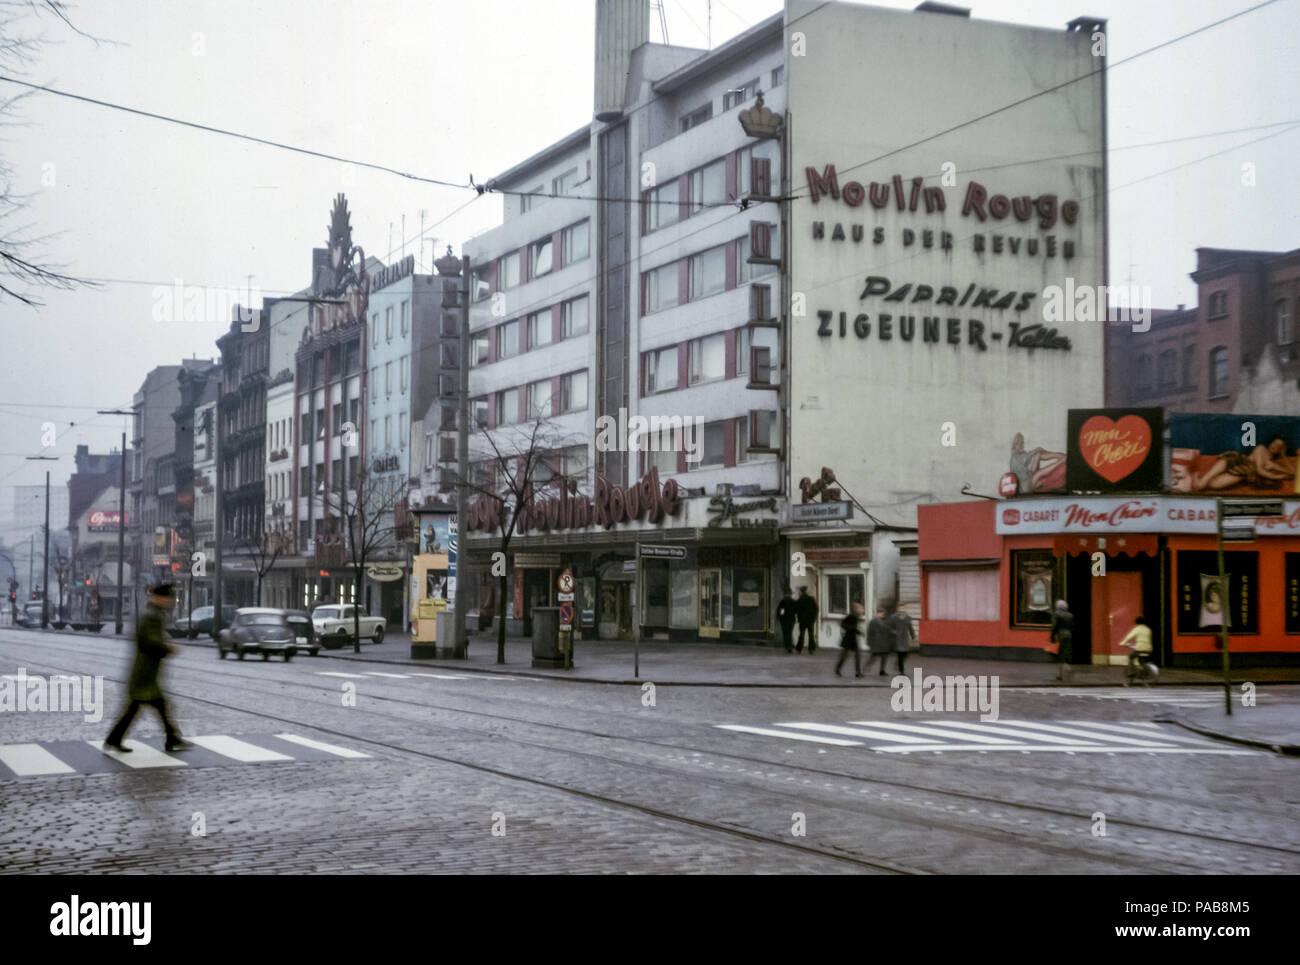 View of Moulin Rouge Cabaret Club on the Reeperbahn and corner of Detlev-Bremer-Strasse, Hamburg, Germany in the 1960s now the Monopol Hotel Stock Photo